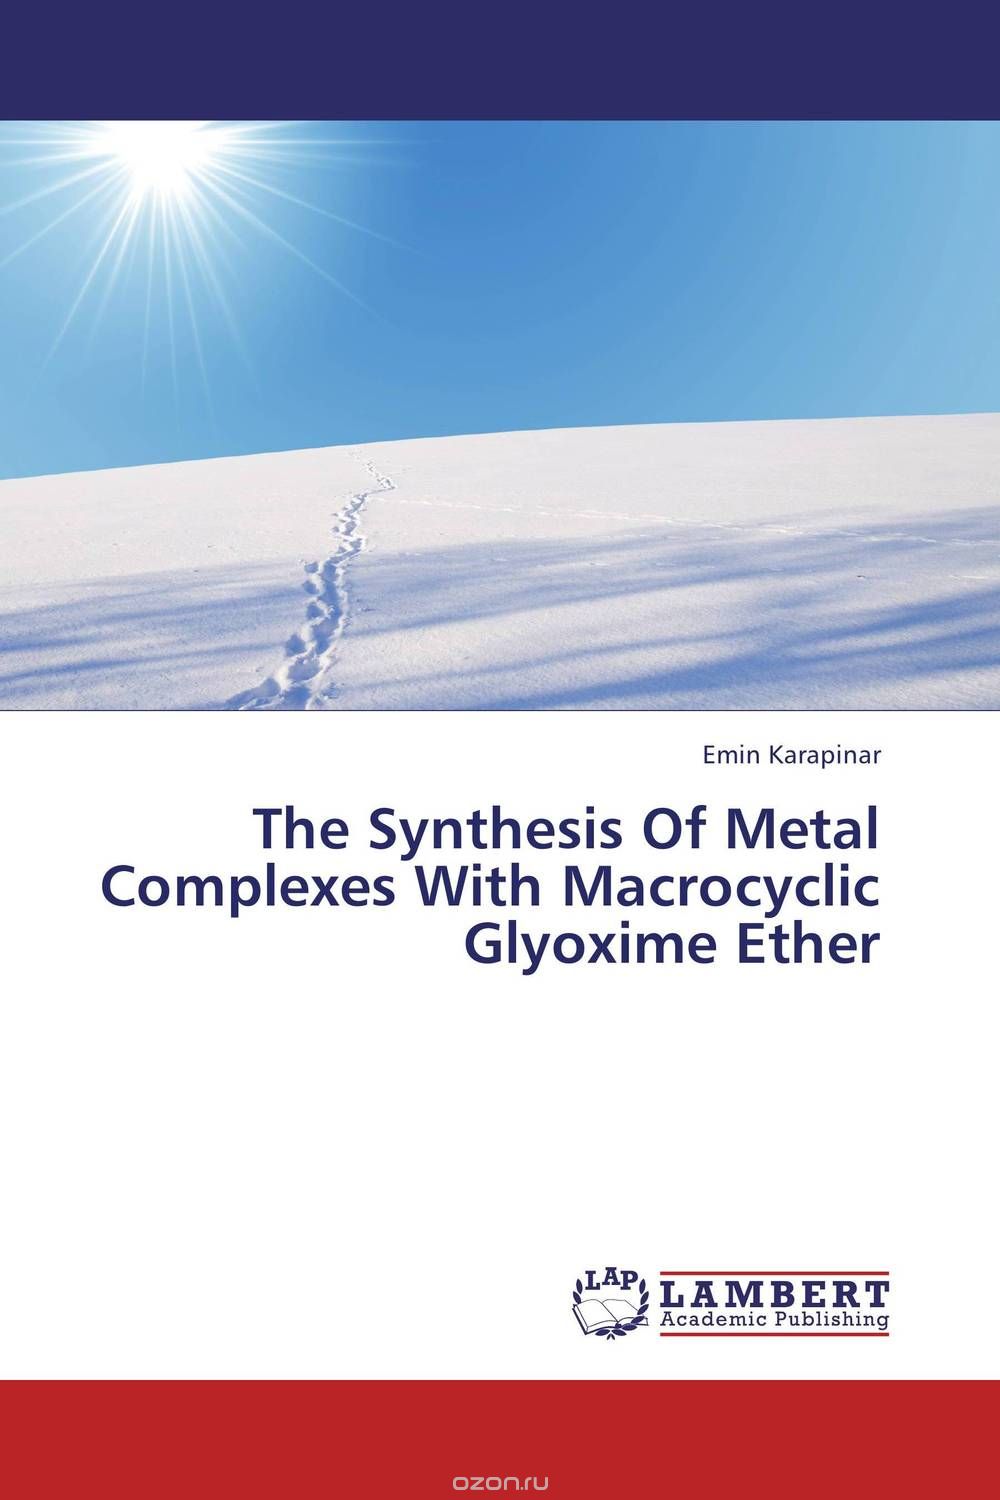 The Synthesis Of Metal Complexes With Macrocyclic Glyoxime Ether